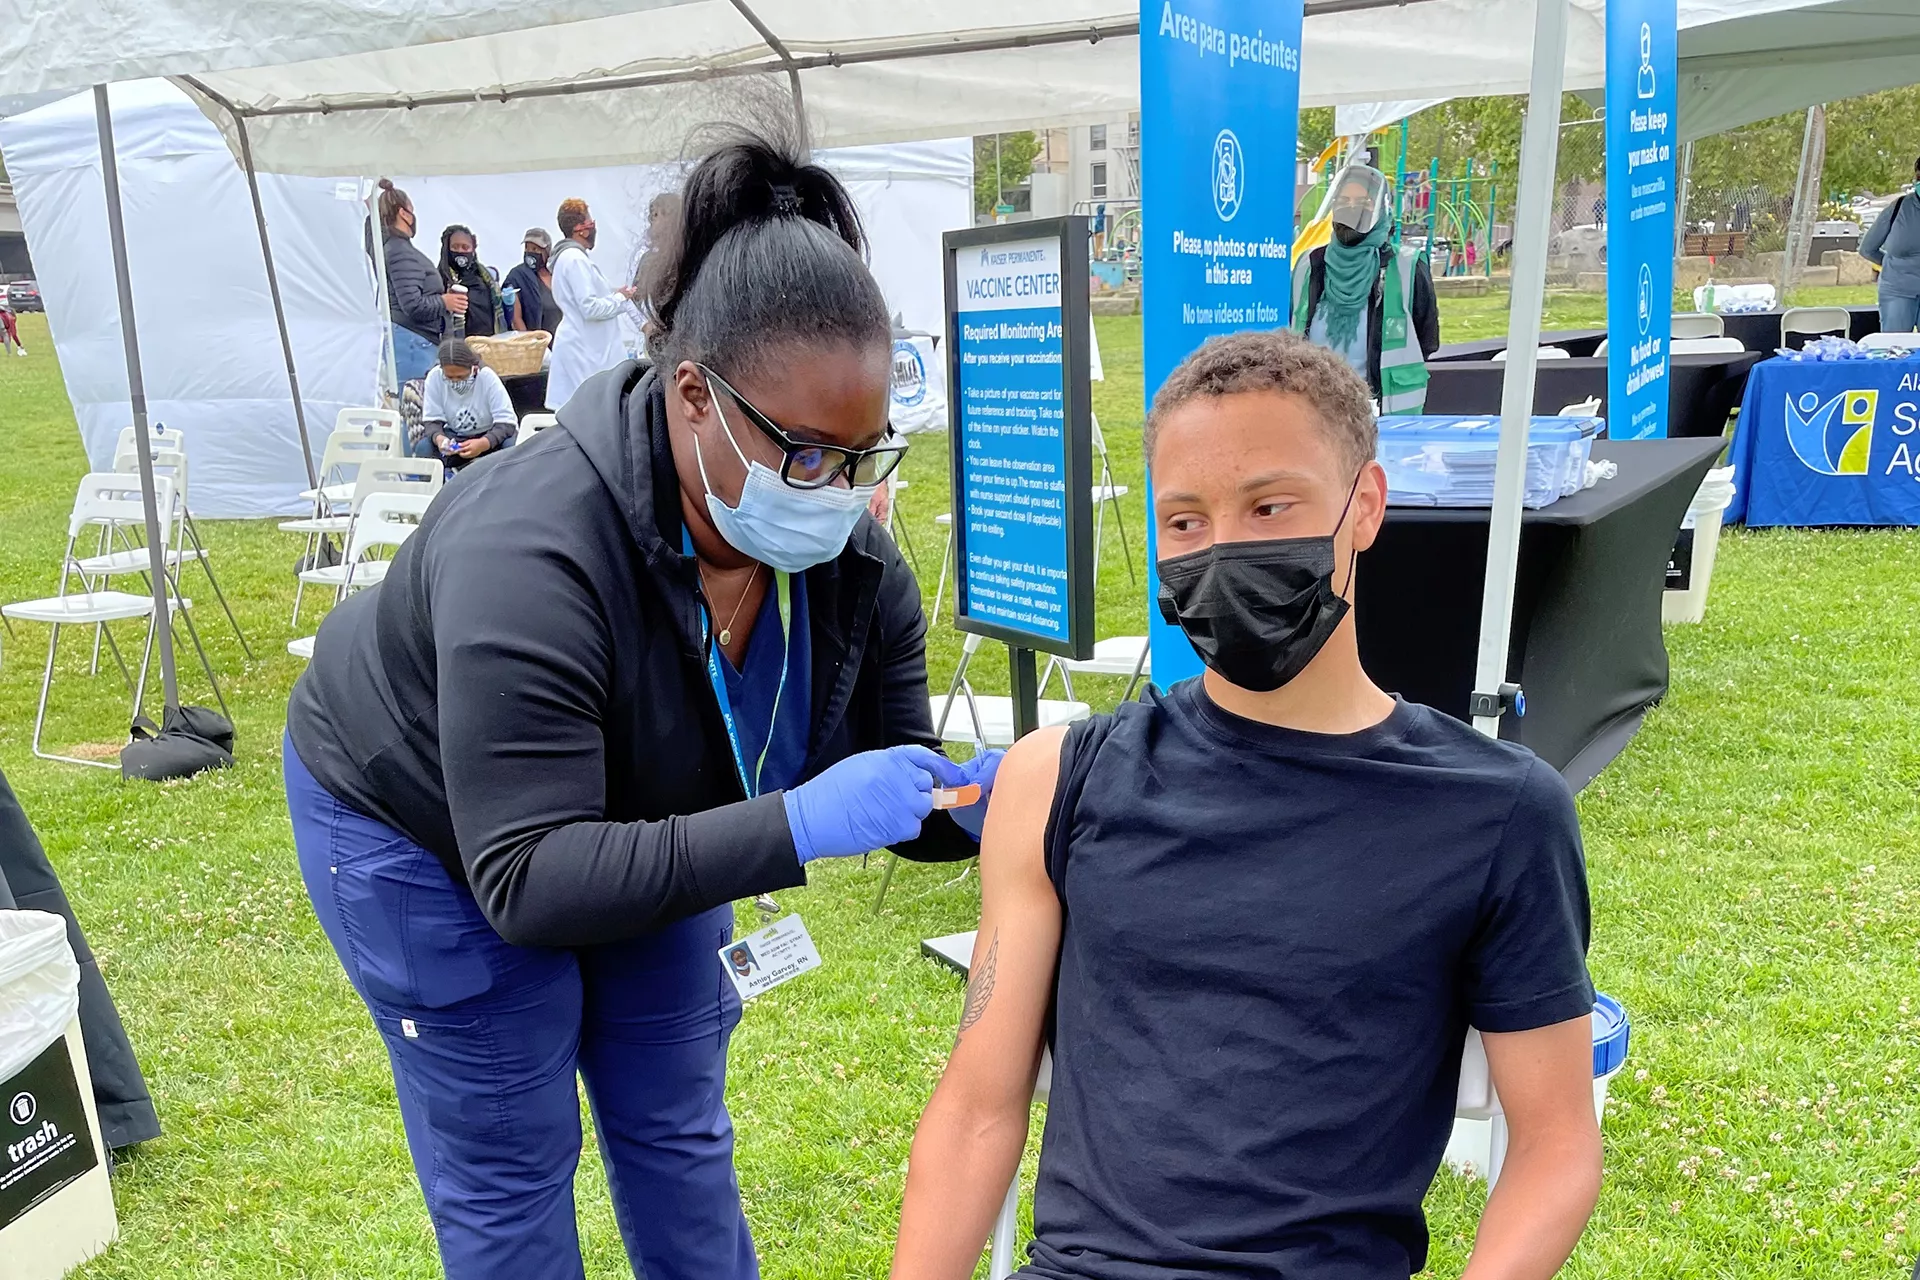 Teen getting vaccinated by nurse at outdoor clinic